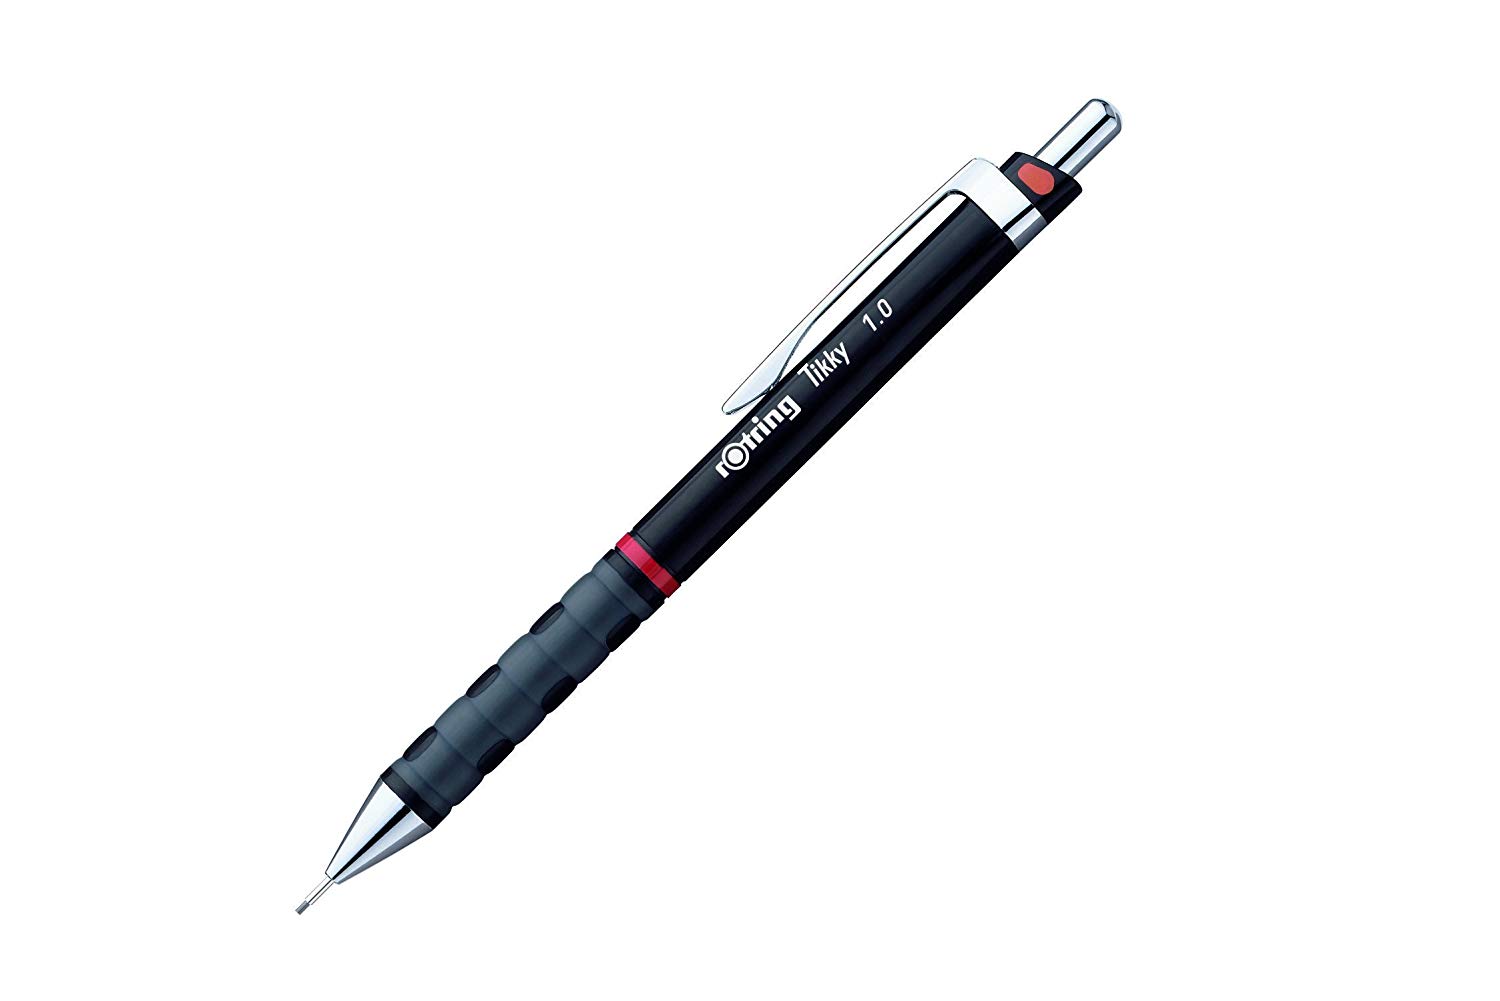 German Technical Writing And Drawing Instrument Company